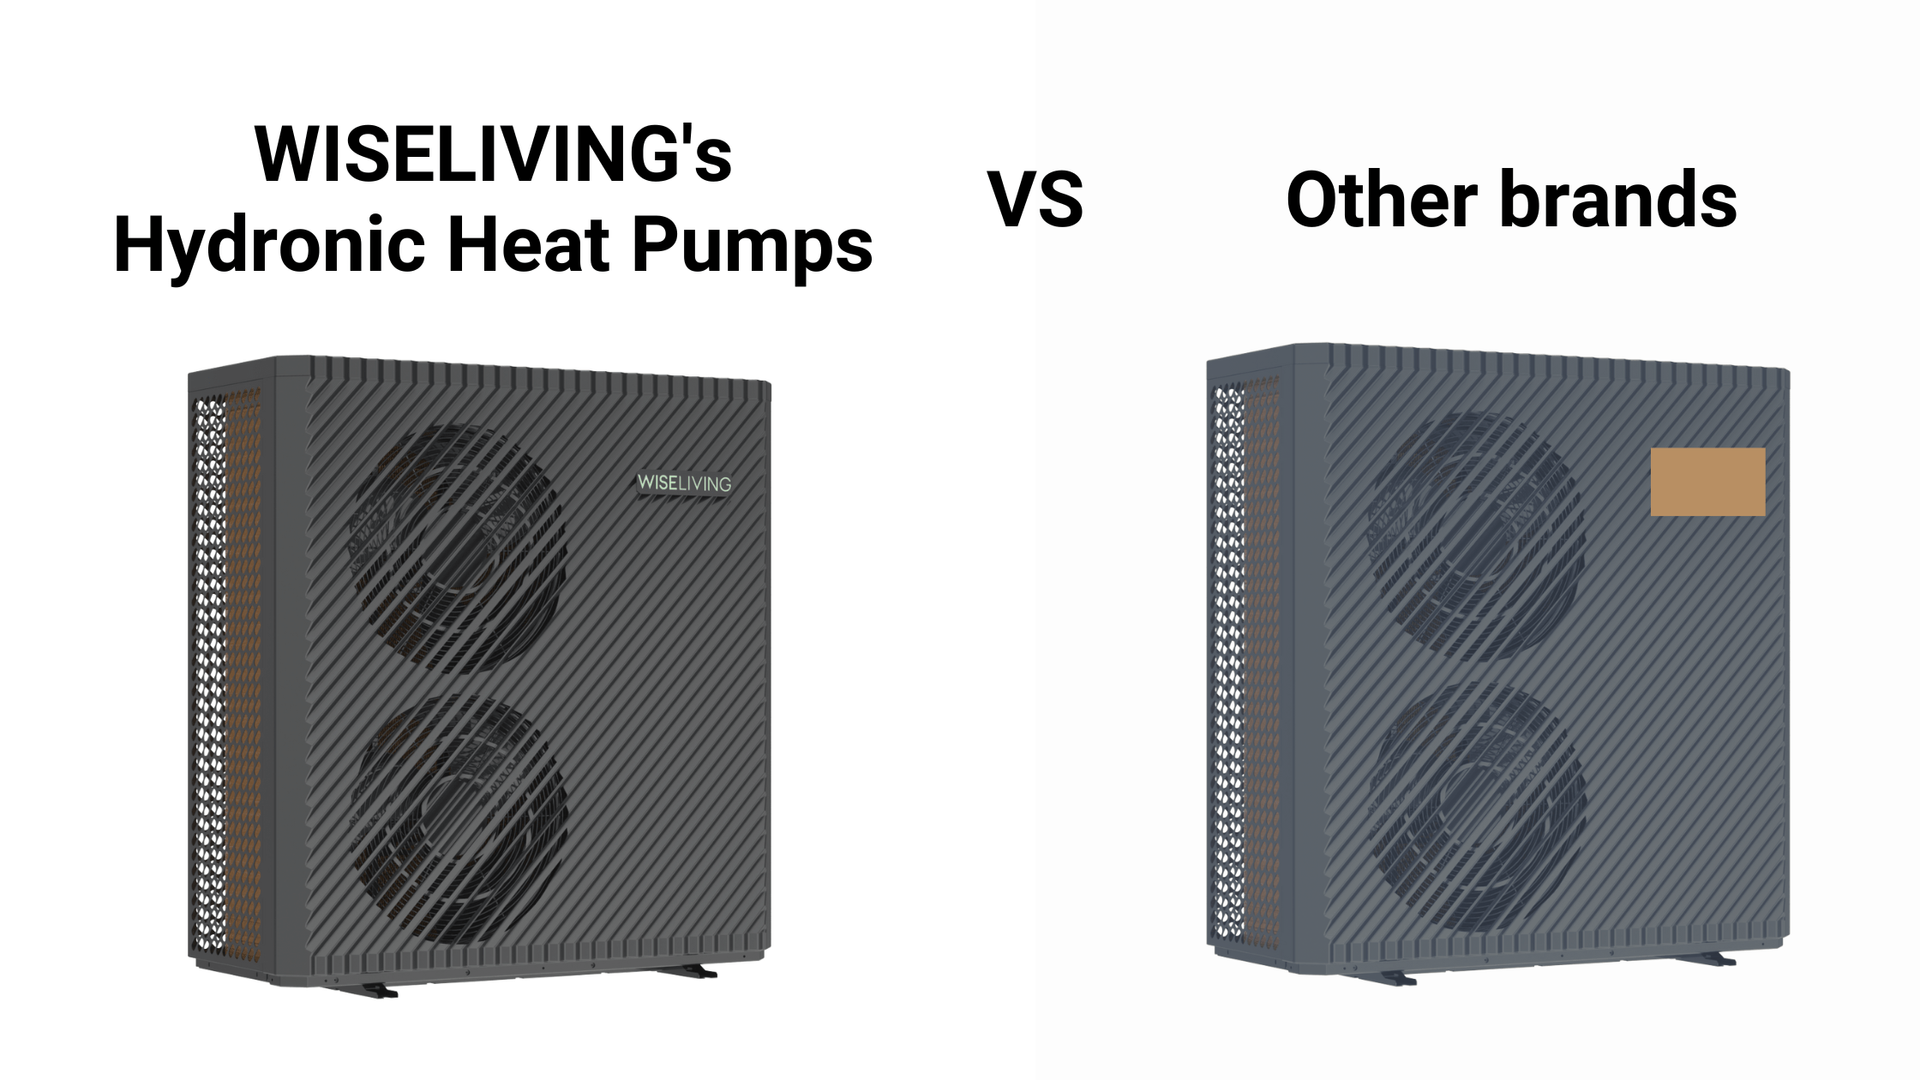 WISELIVING Hydronic Heat Pumps vs. Competitors